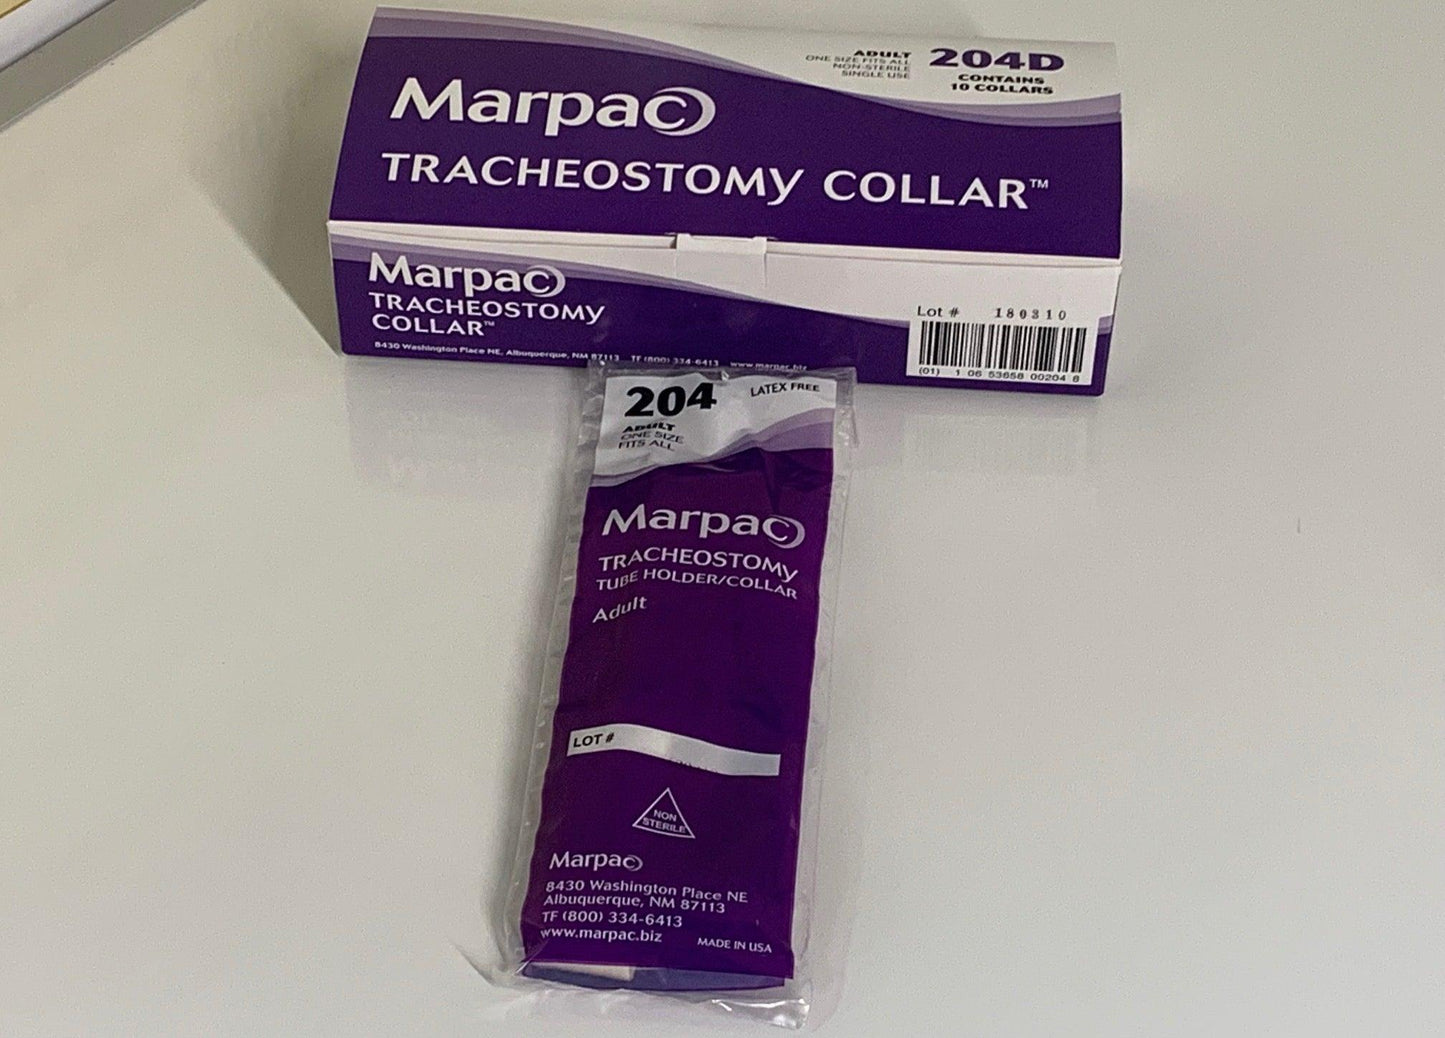 NEW 10PK Adult Marpac Tracheostomy Collar with Tube Holder Ref PN 204D - MBR Medicals